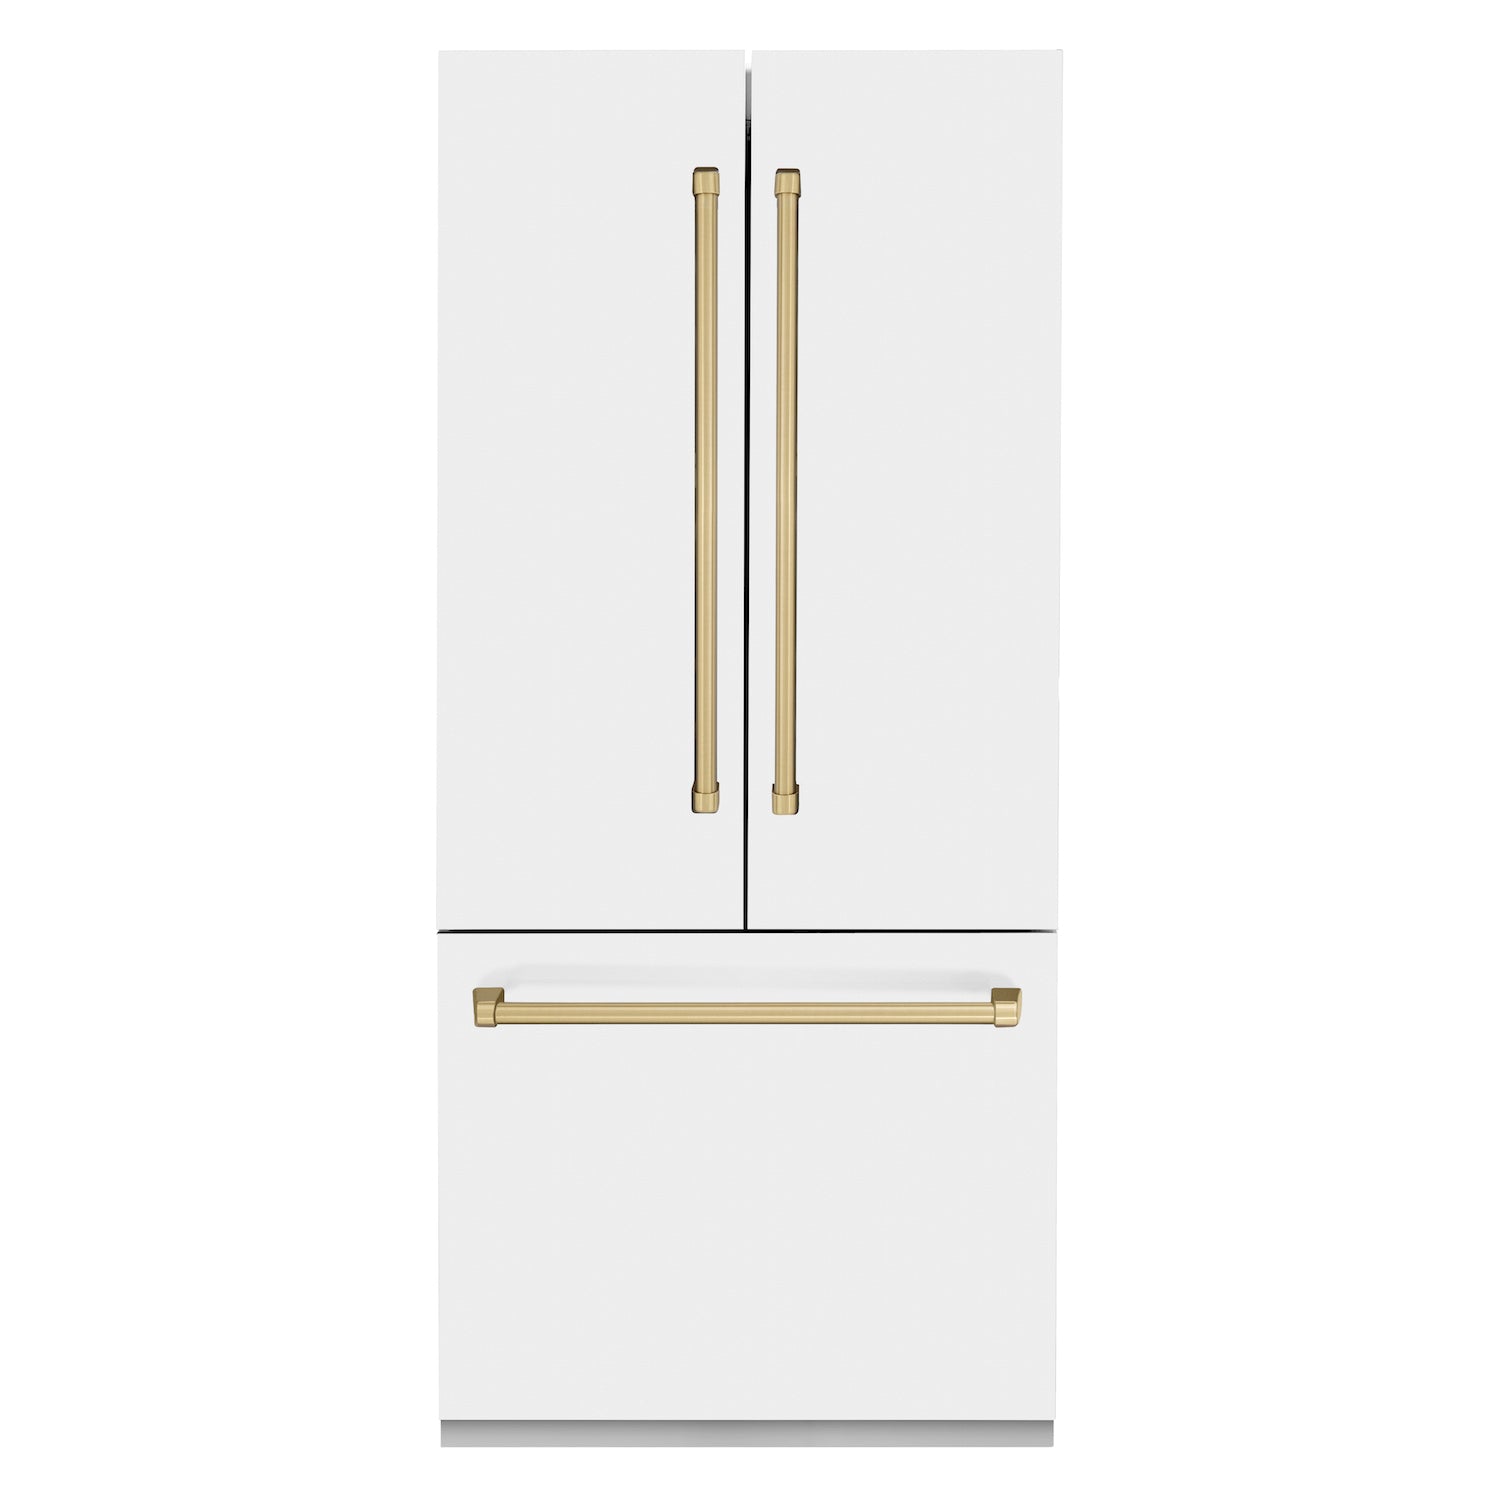 ZLINE Autograph Edition 36 in. Built-in Refrigerator in White Matte with Champagne Bronze Accents (RBIVZ-WM-36-CB) front, with doors closed.